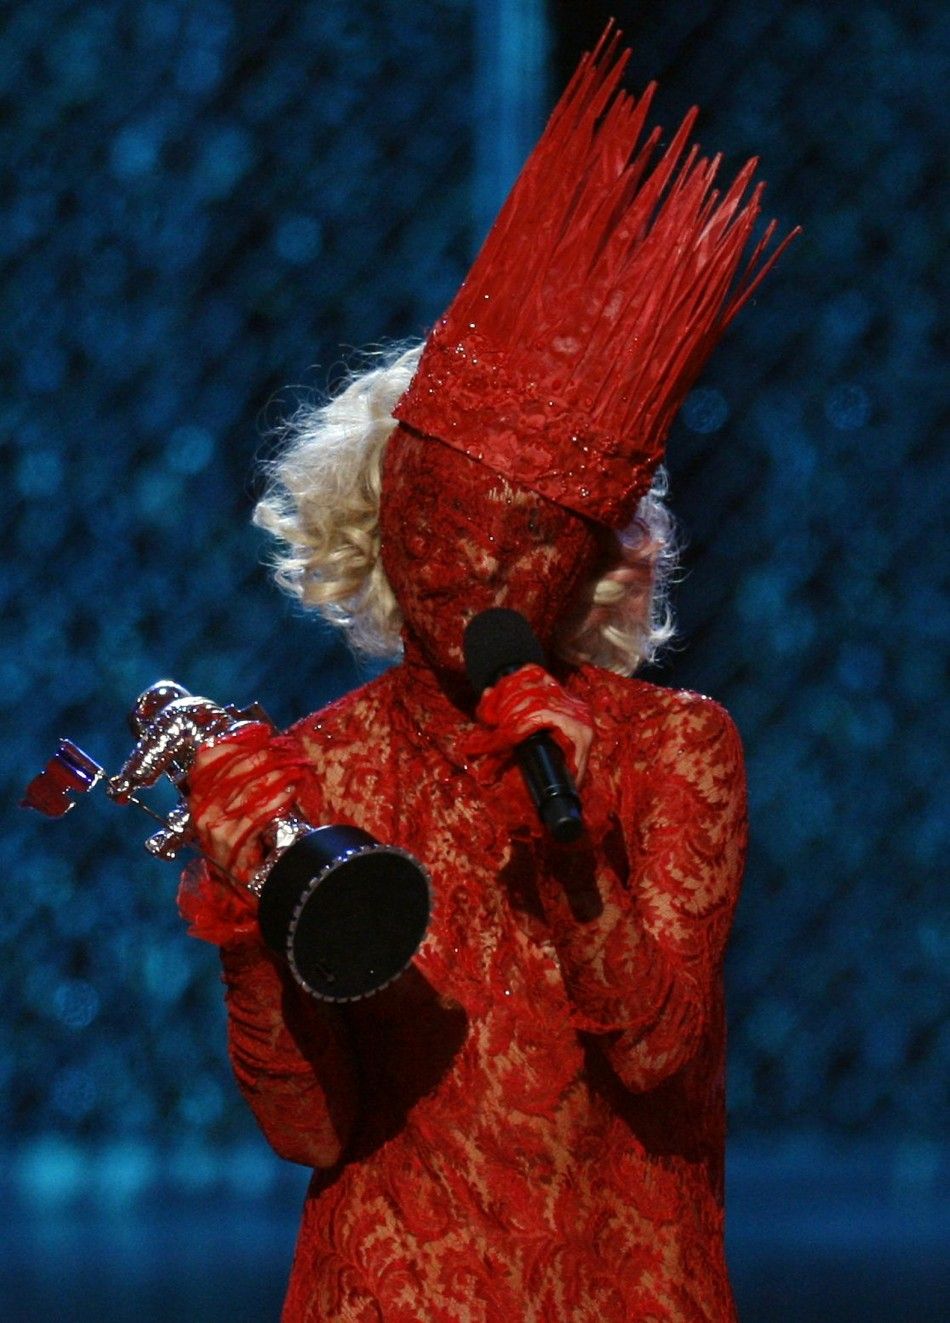 Lady Gaga accepts the award for best new artist at the 2009 MTV Video Music Awards in New York, September 13, 2009. 